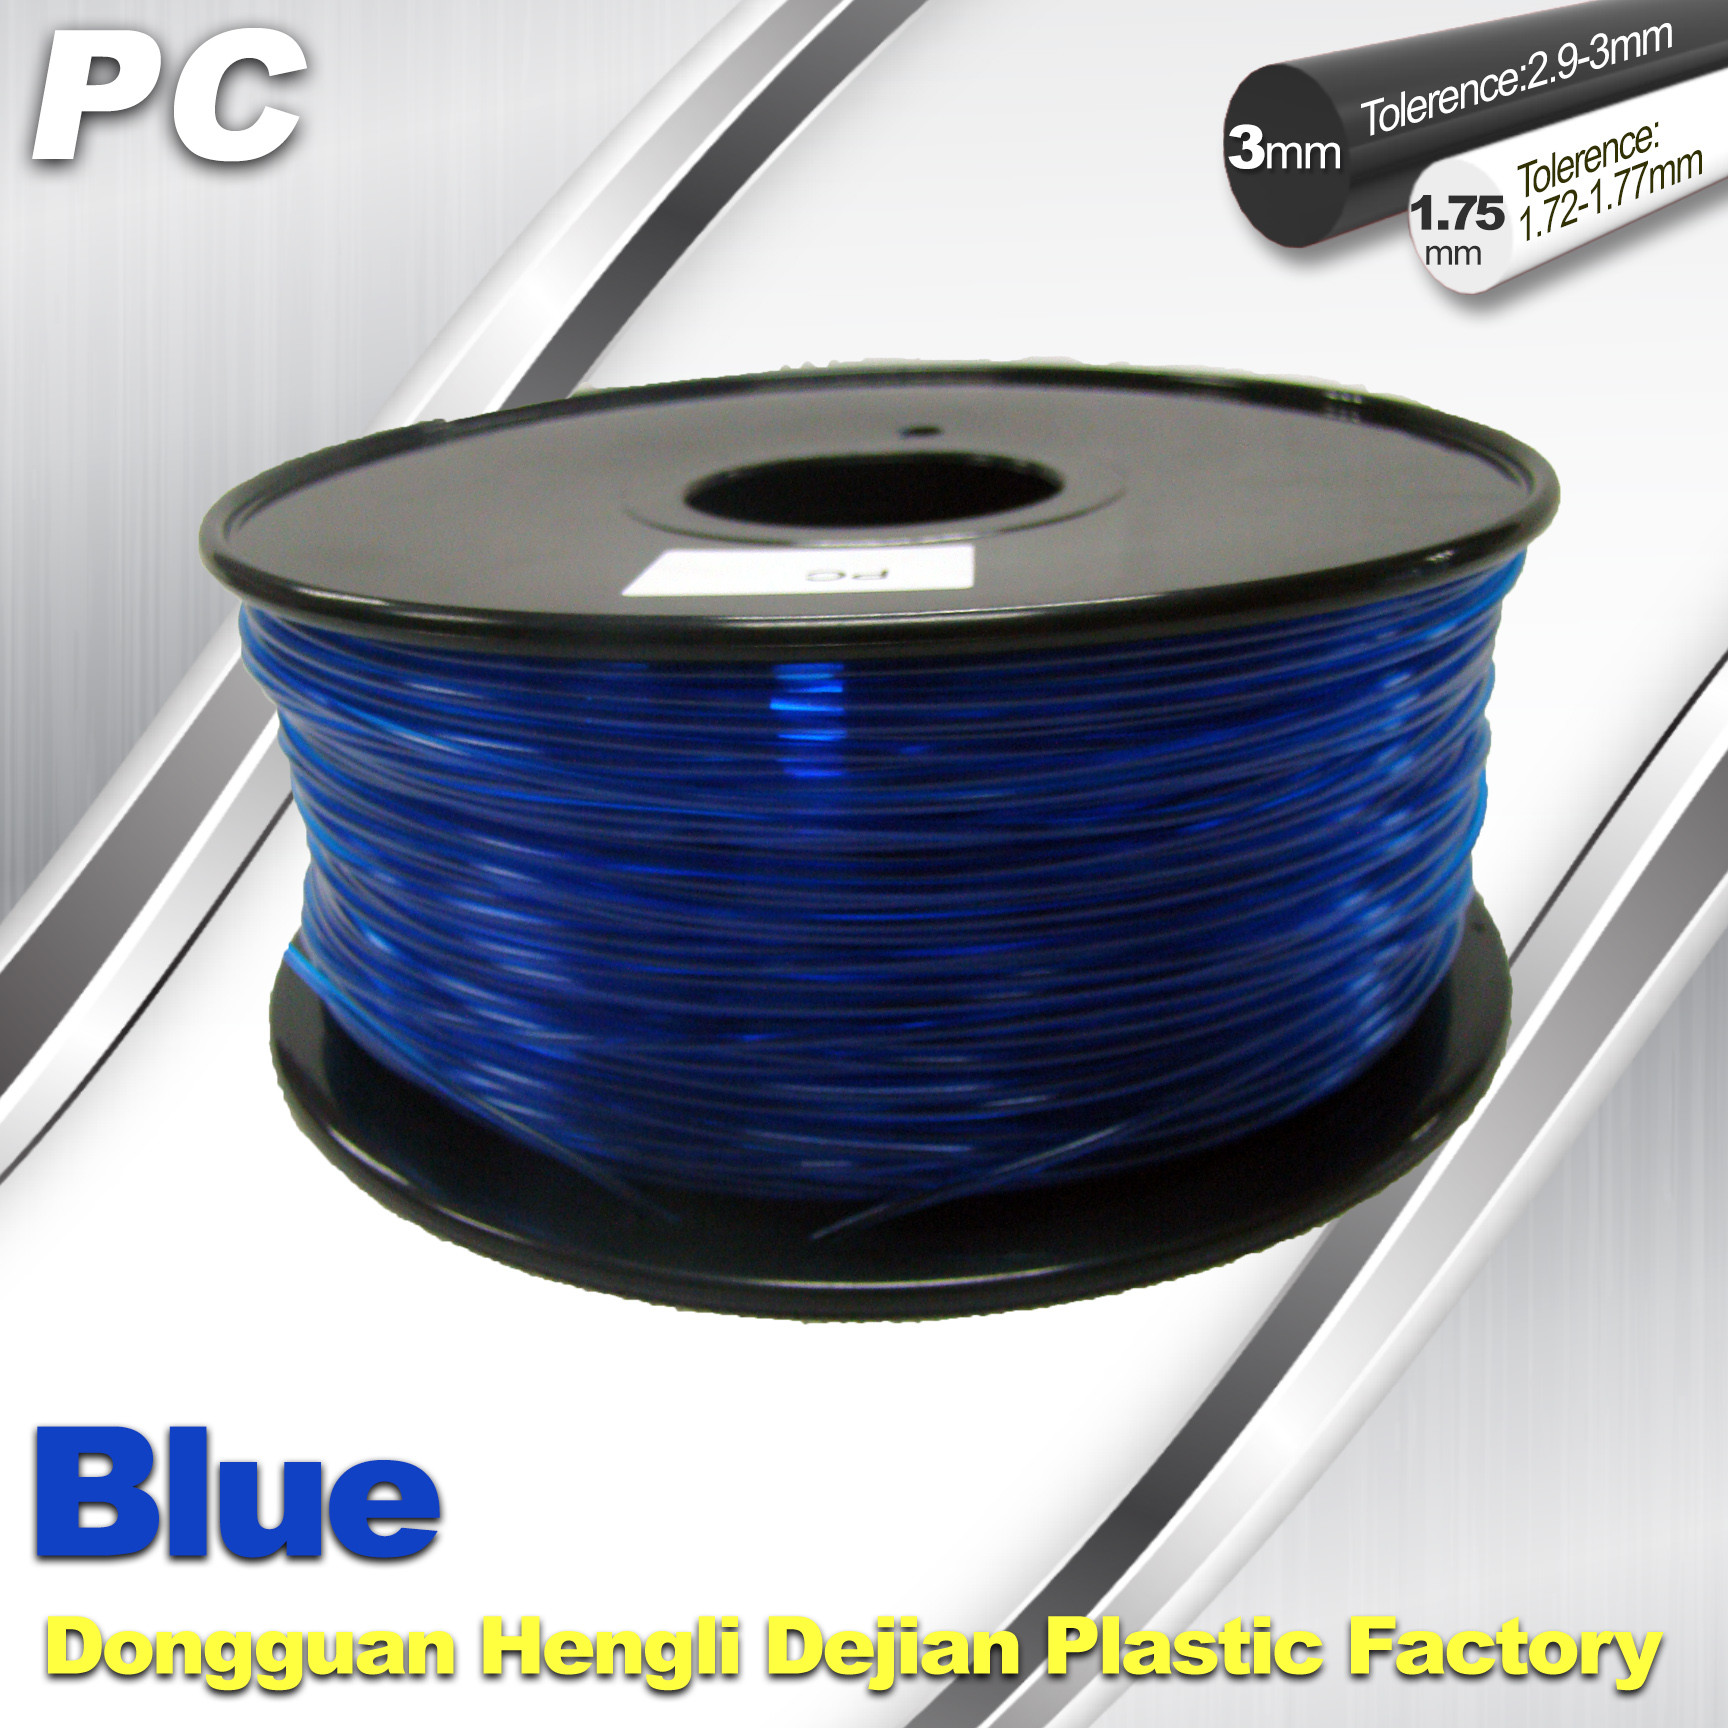 China Blue 3mm Polycarbonate Filament Strength With Toughness1kg / roll PC Flament factory